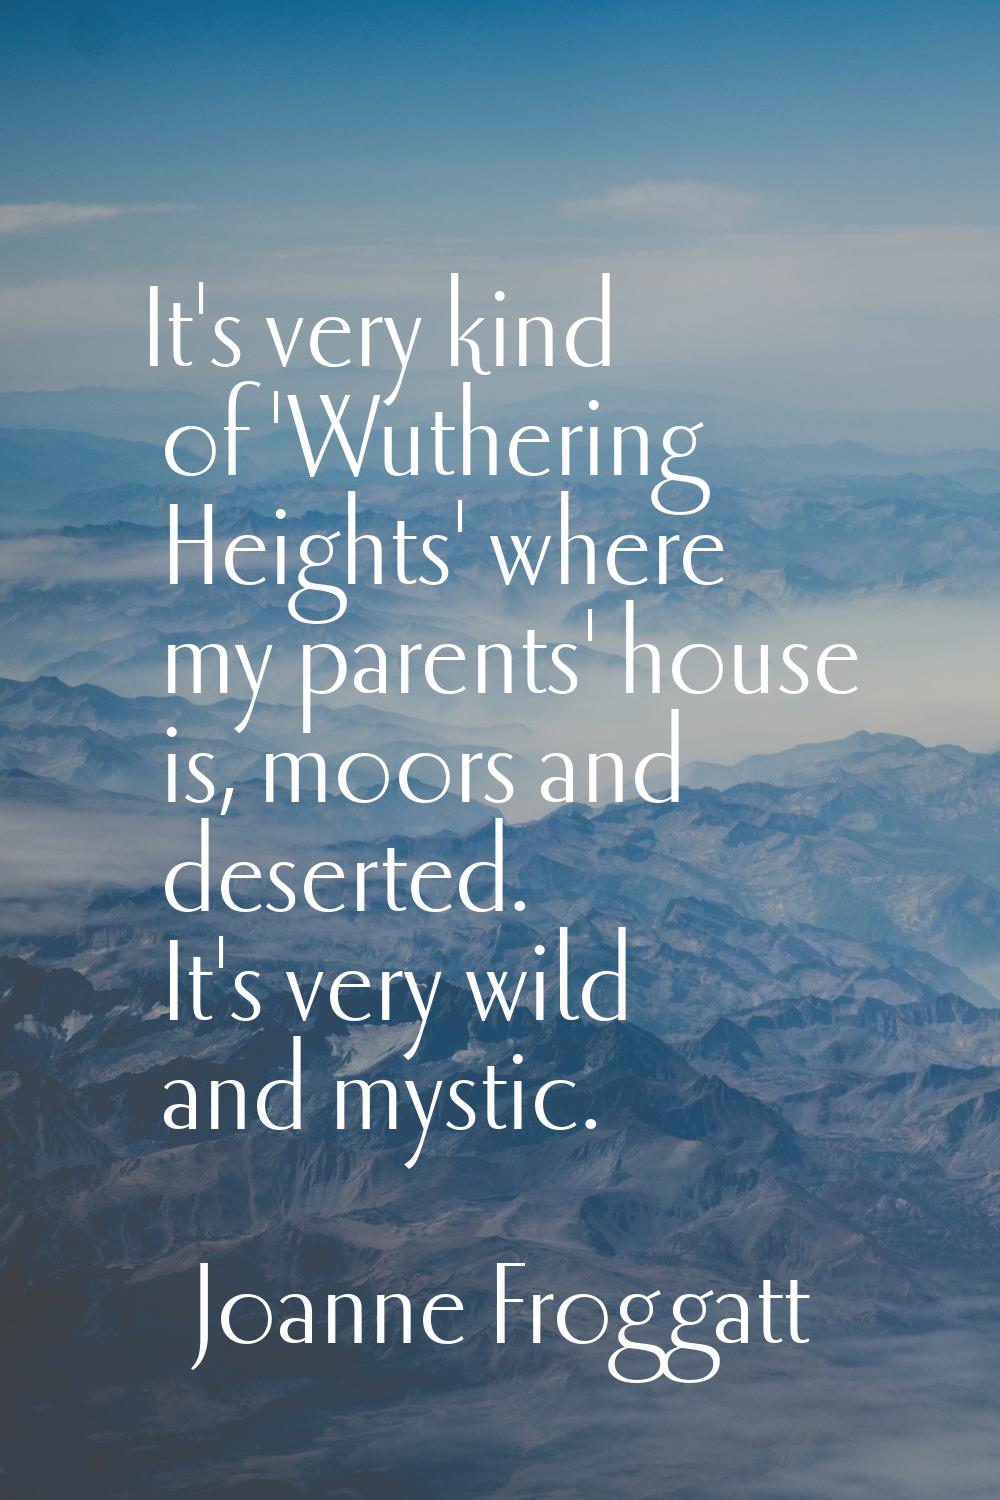 It's very kind of 'Wuthering Heights' where my parents' house is, moors and deserted. It's very wil